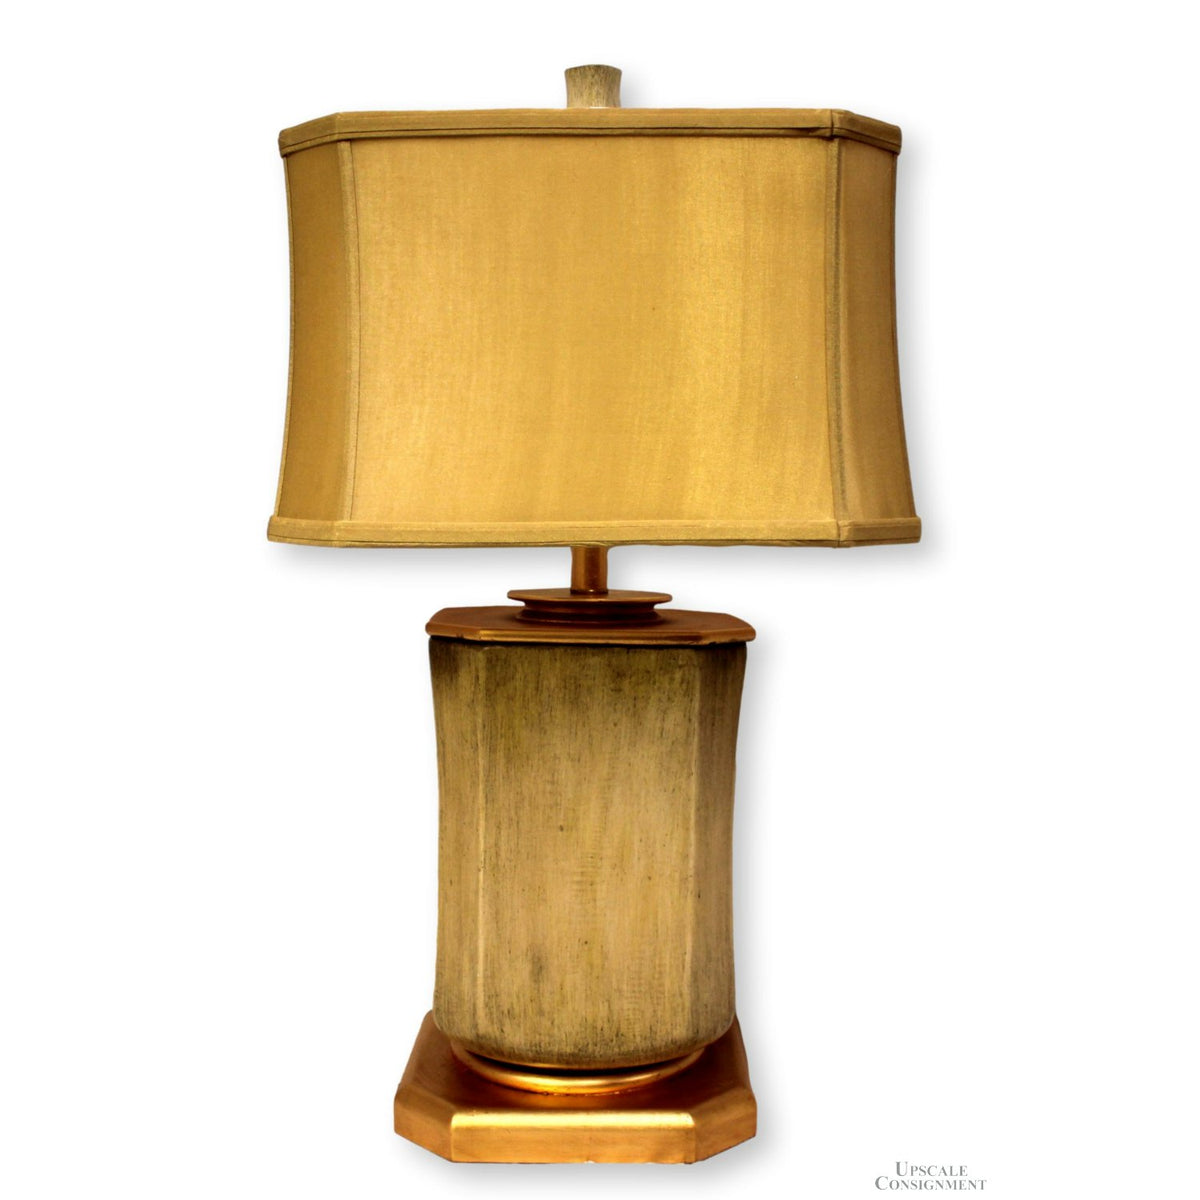 Wildwood Accents 3-Way Ceramic Table Lamp